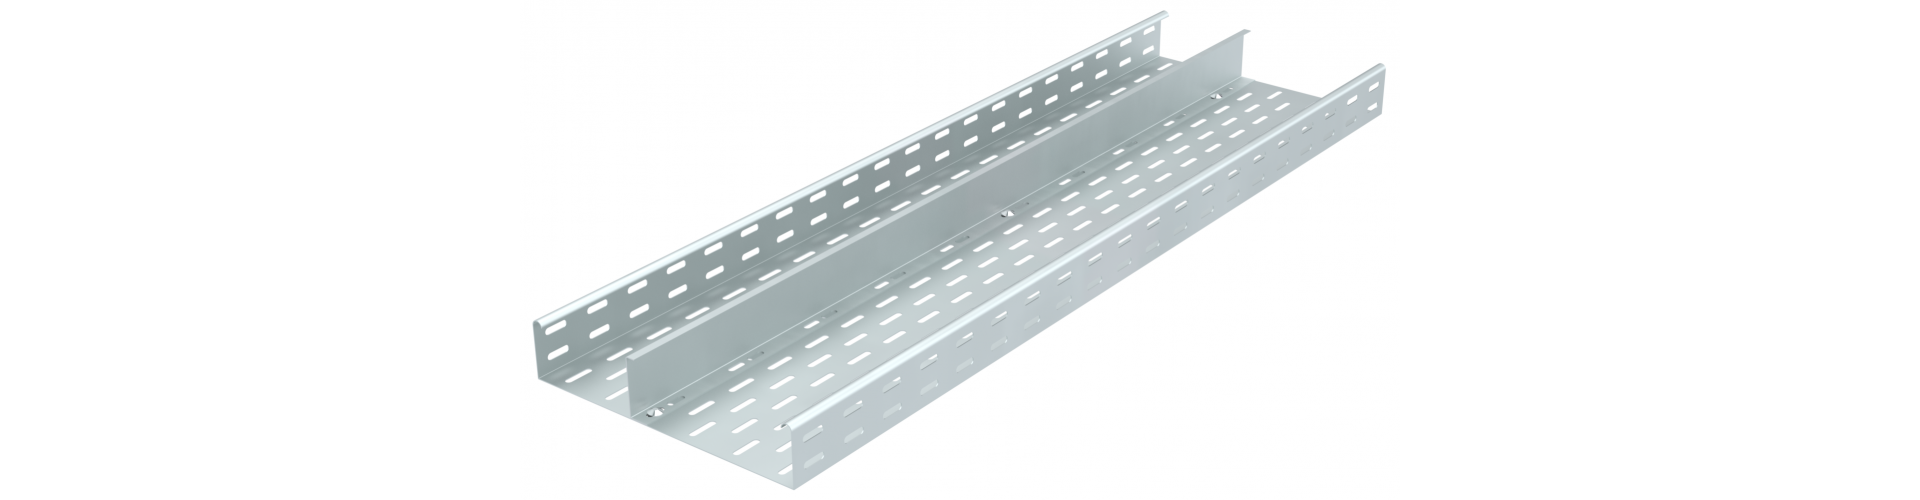 CABLE TRAY SEPARATORS / CABLE LADDER SEPARATORS